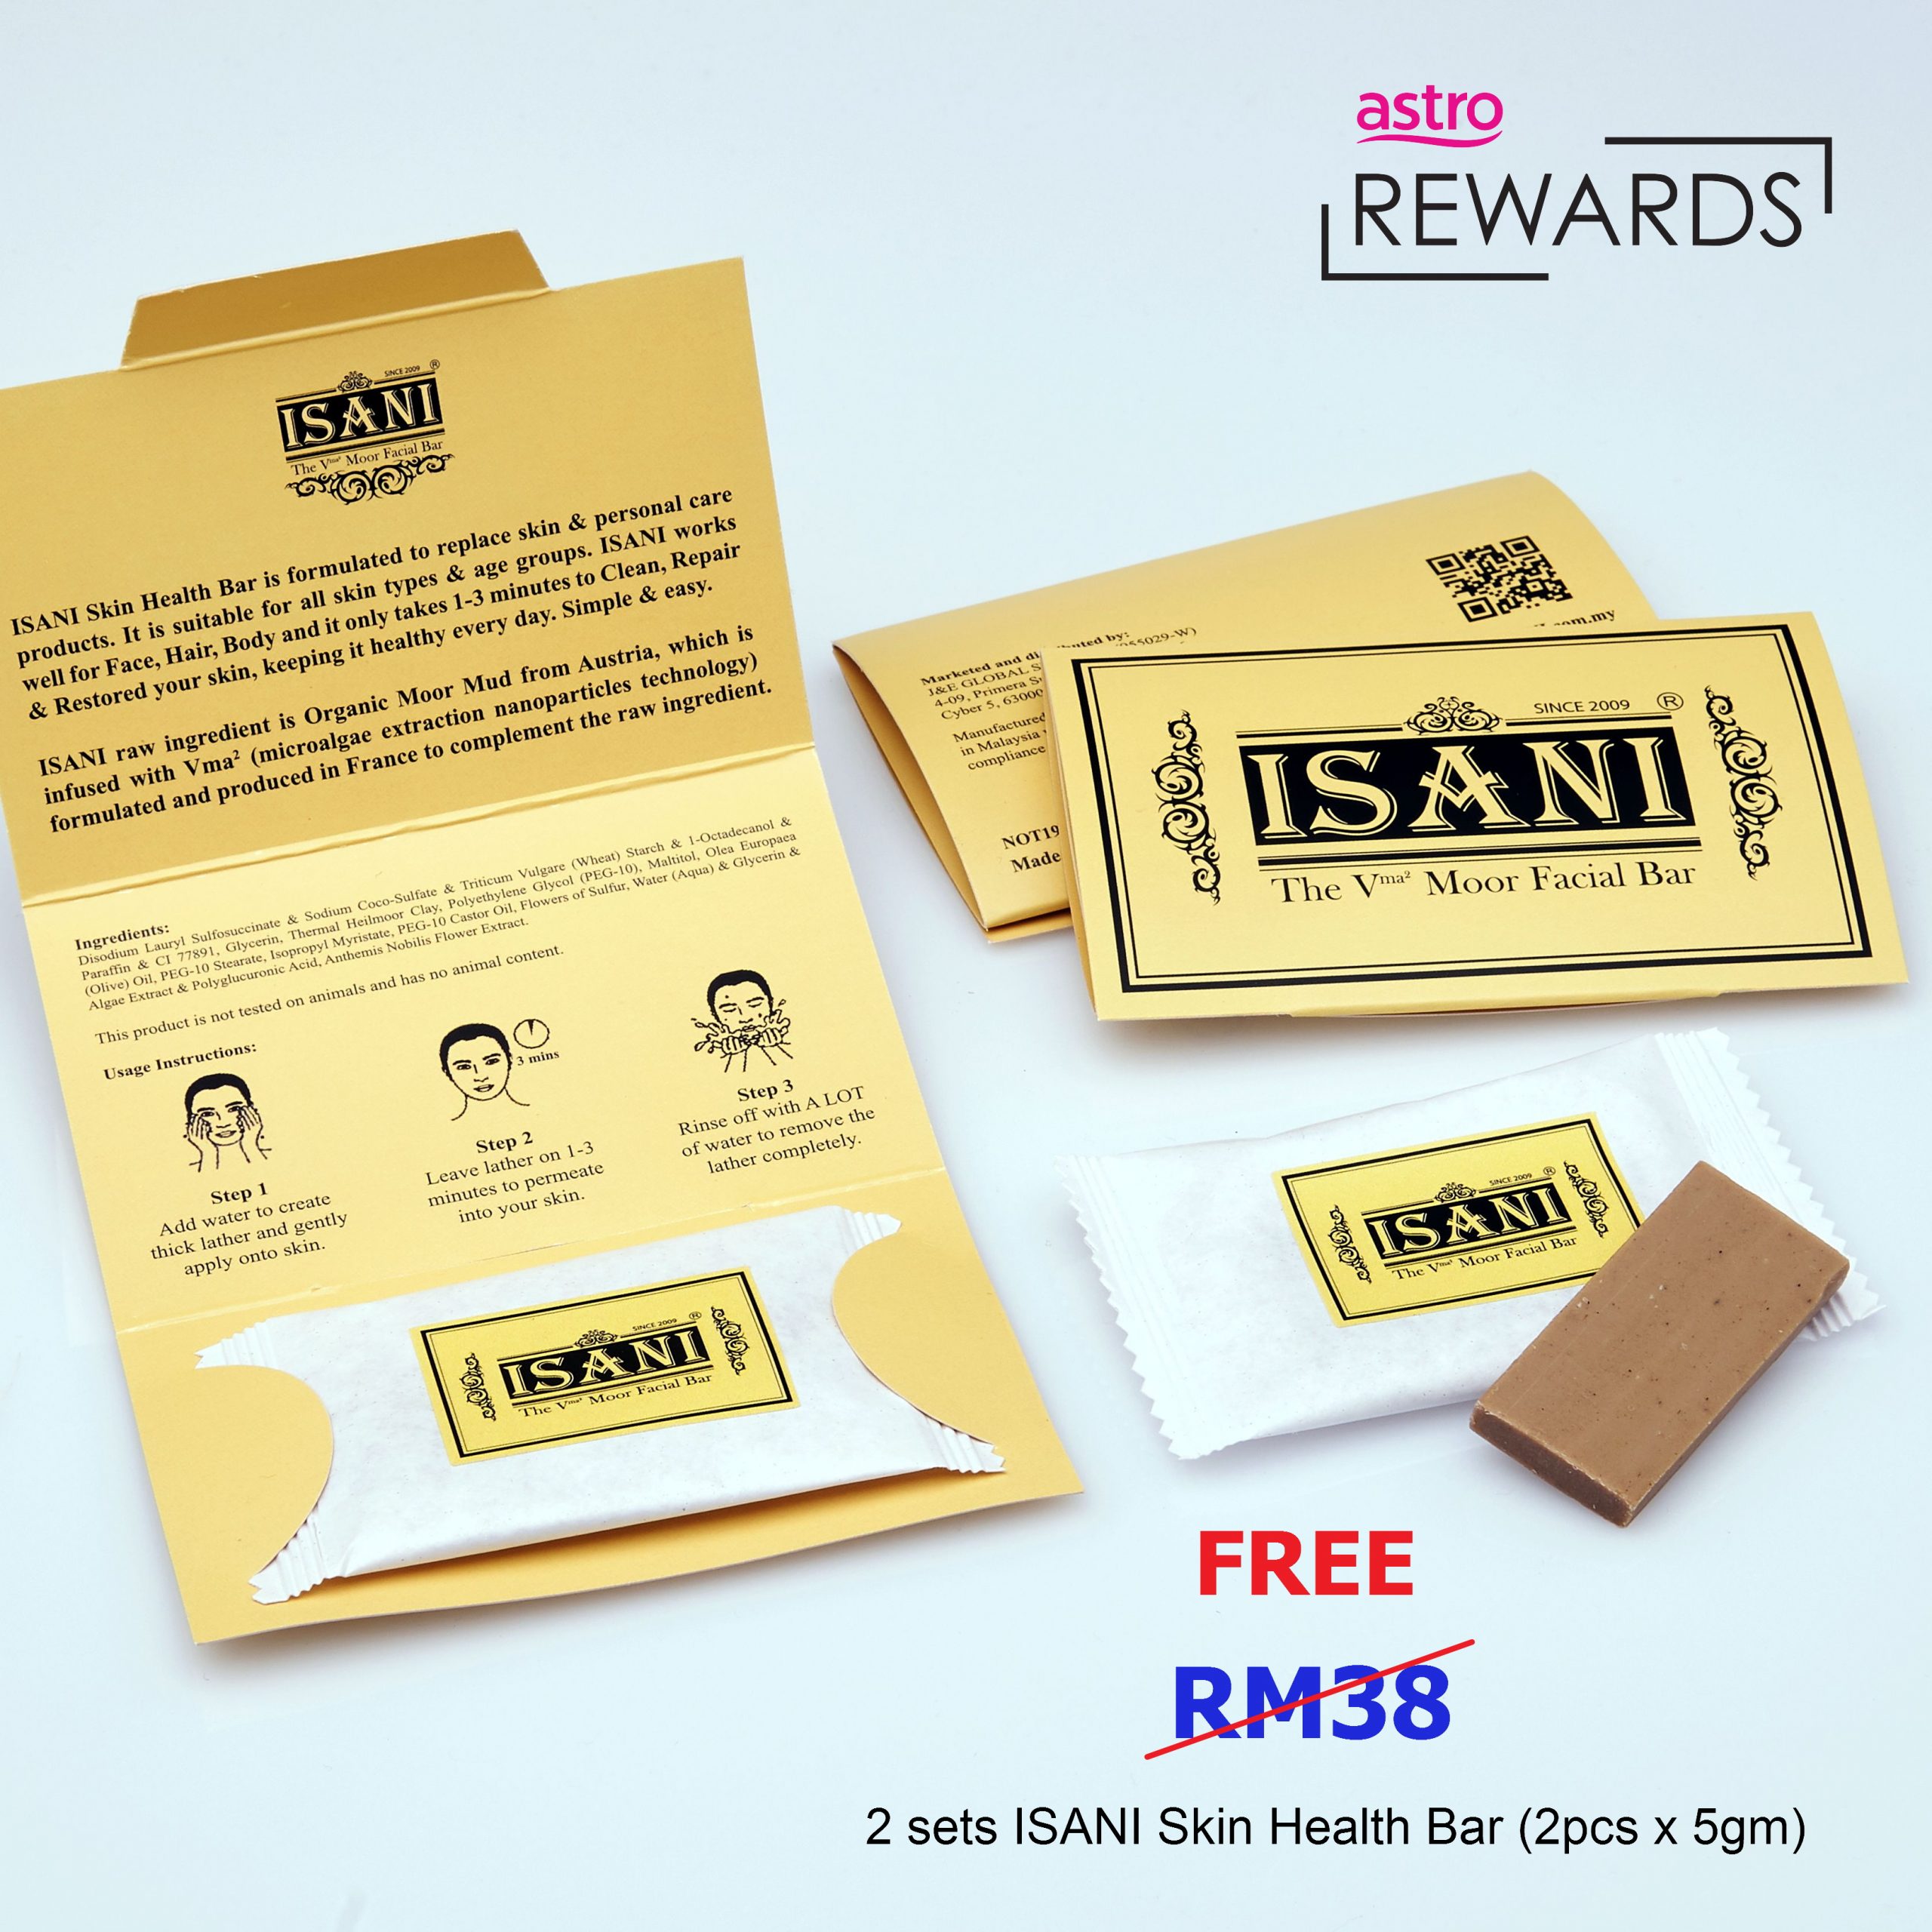 Free 2 sets ISANI exclusive for Astro customers